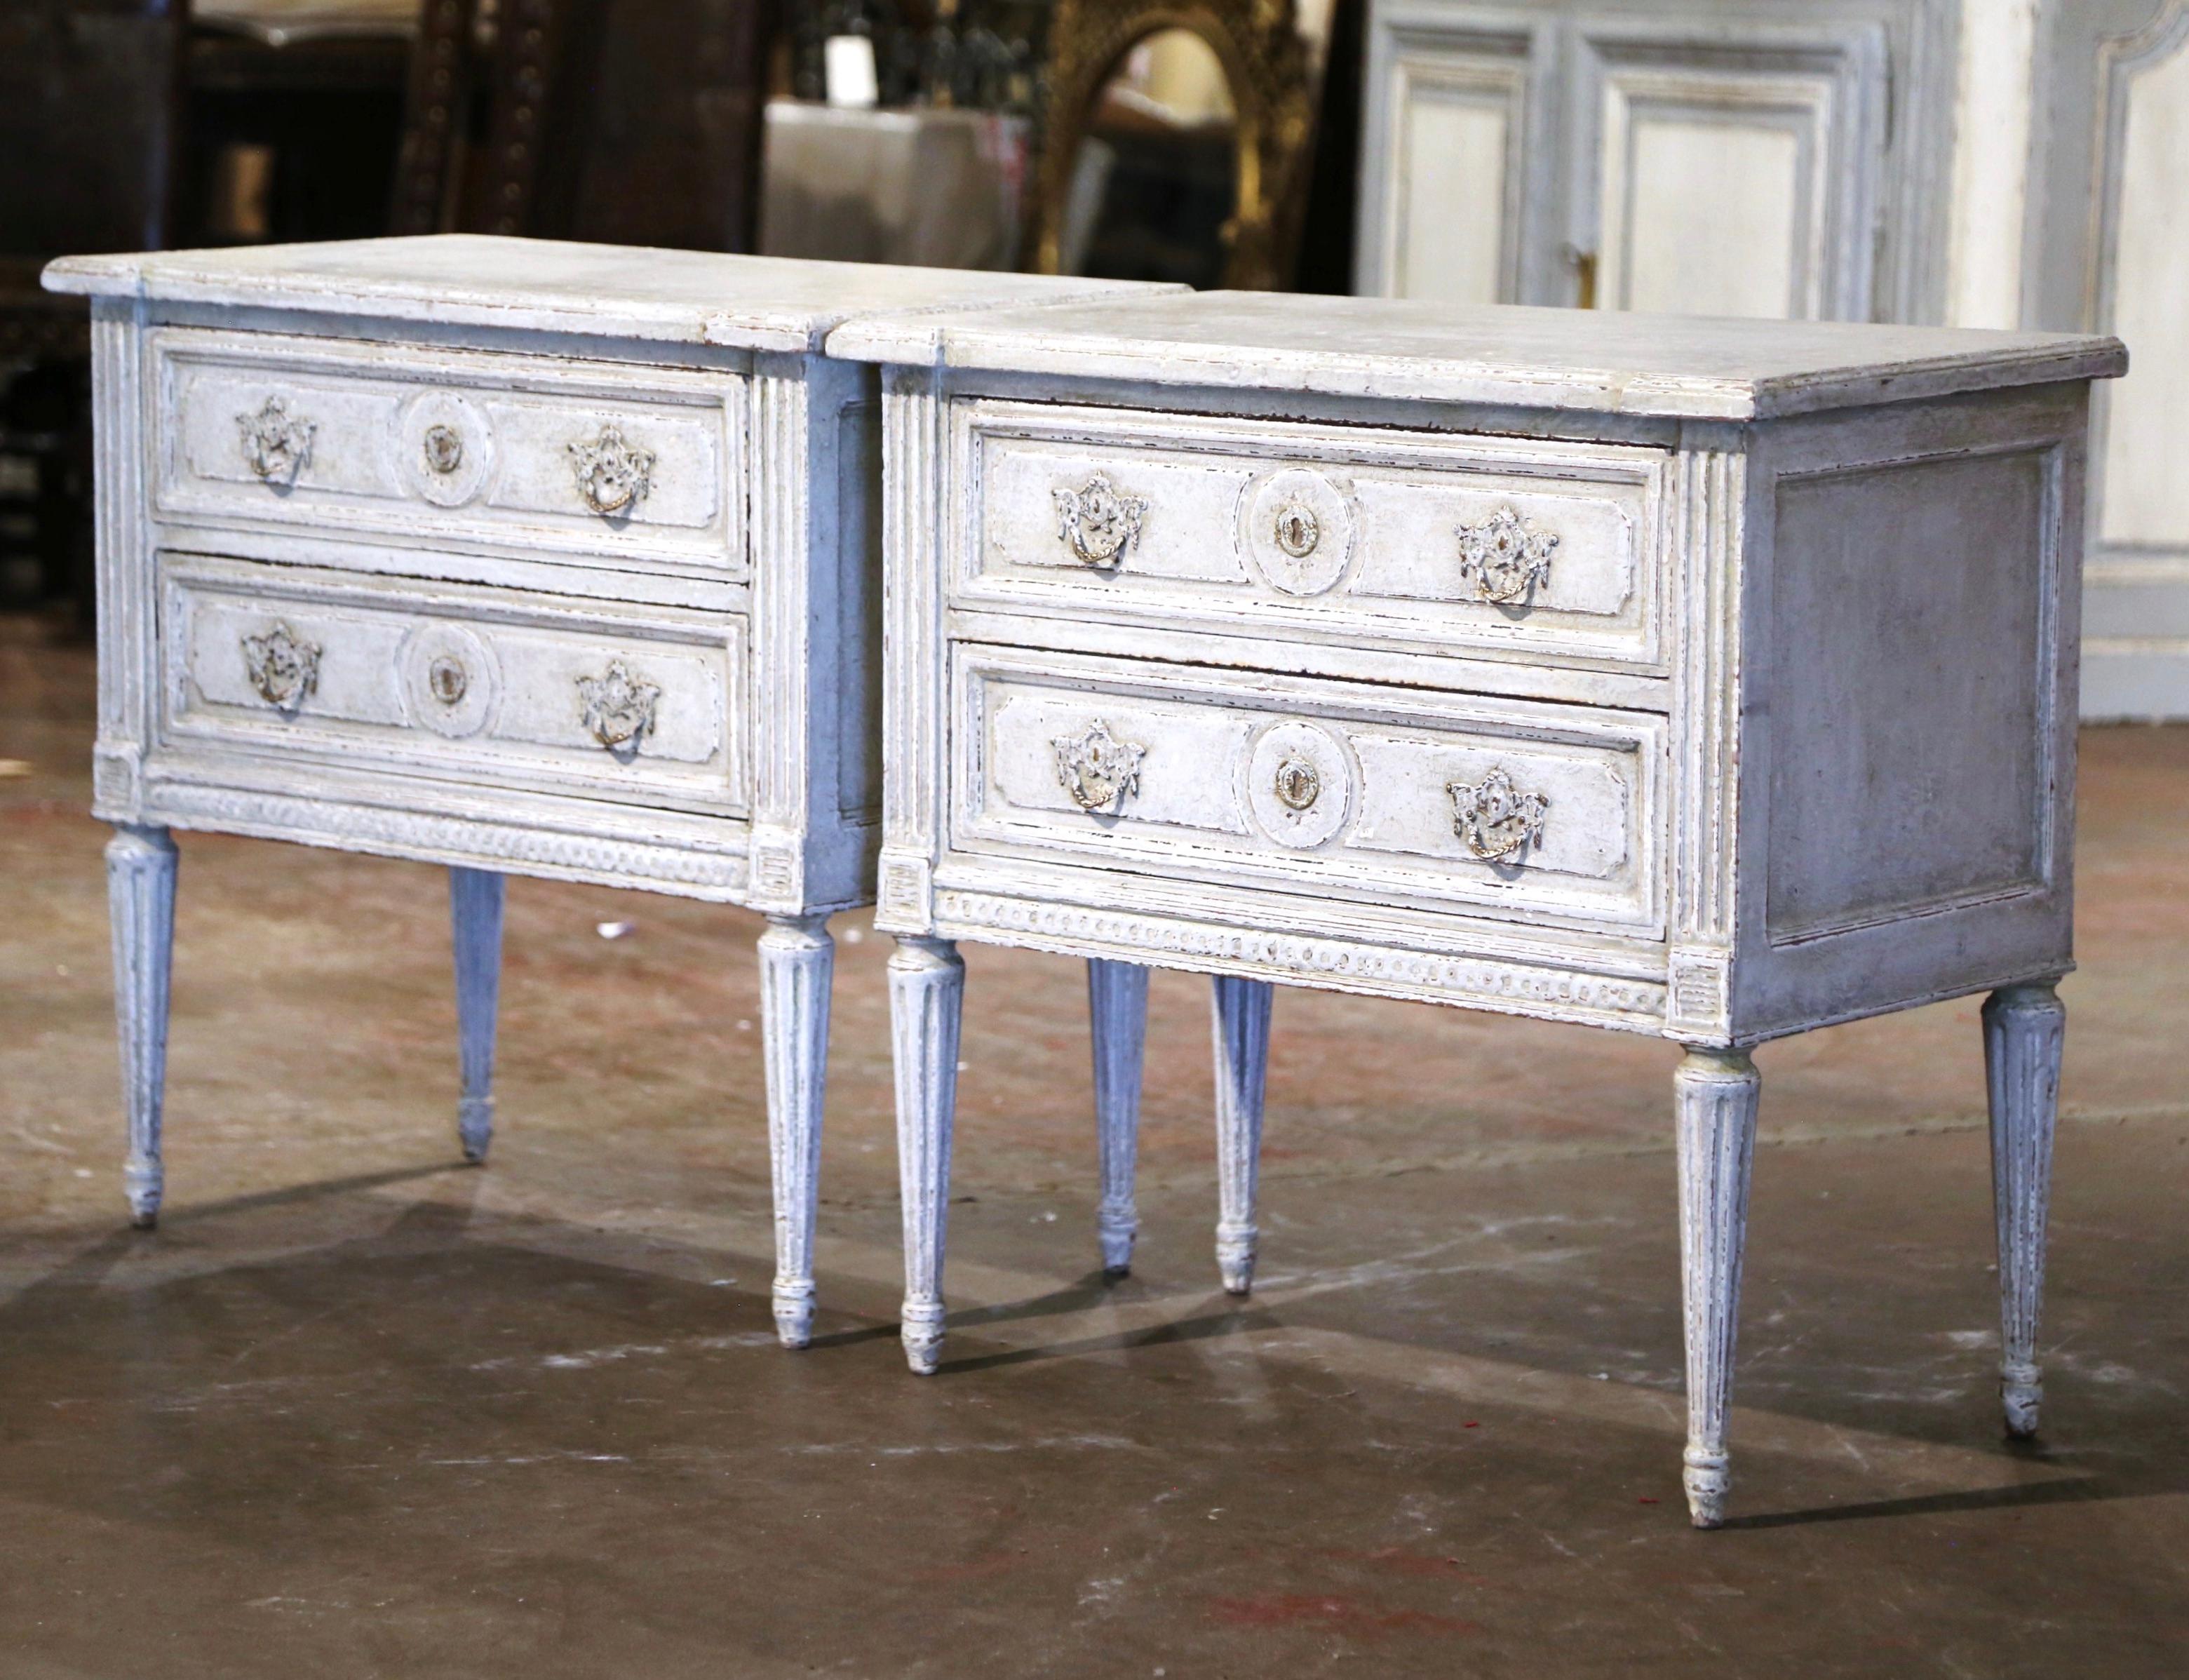 Complete your bedroom with this elegant pair of antique painted bedside cabinets! Crafted in France, circa 1880, each commode stands on tall tapered fluted legs decorated with floral rosette medallions at the shoulder. The chest with side cut spline